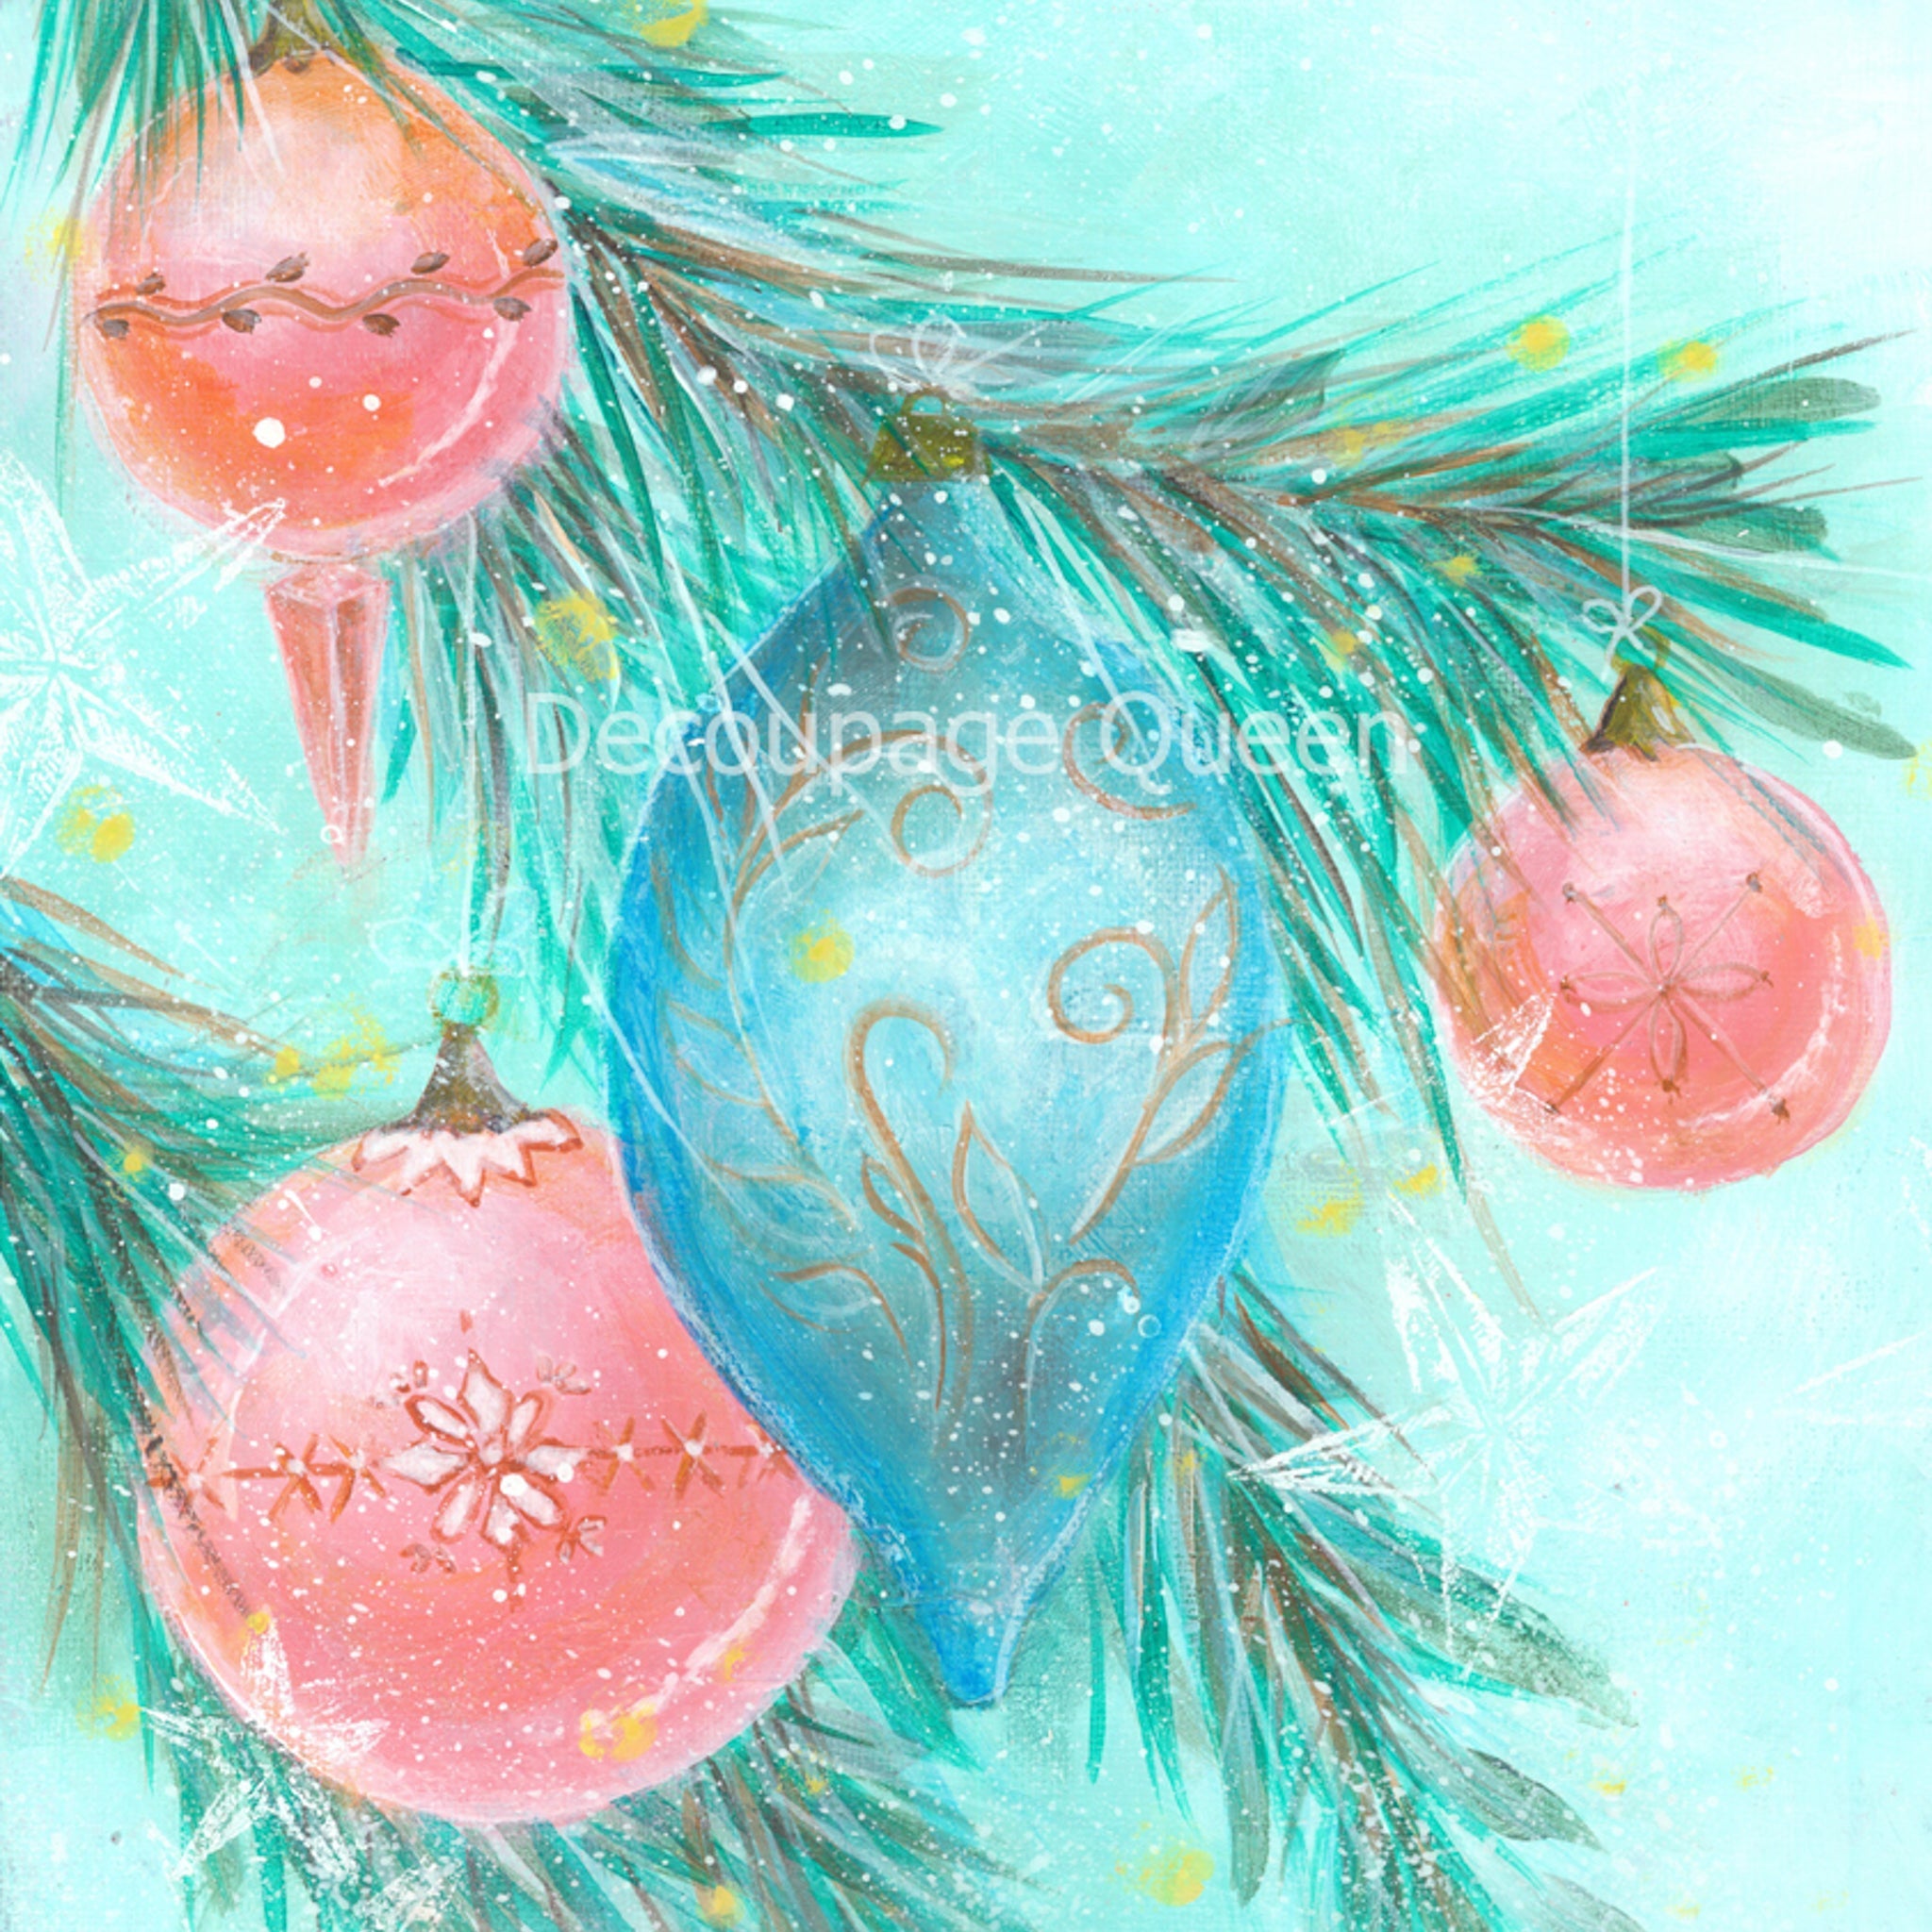 Hand painted style A2 rice paper design of pink and blue ornaments on a pine tree on a soft teal background.